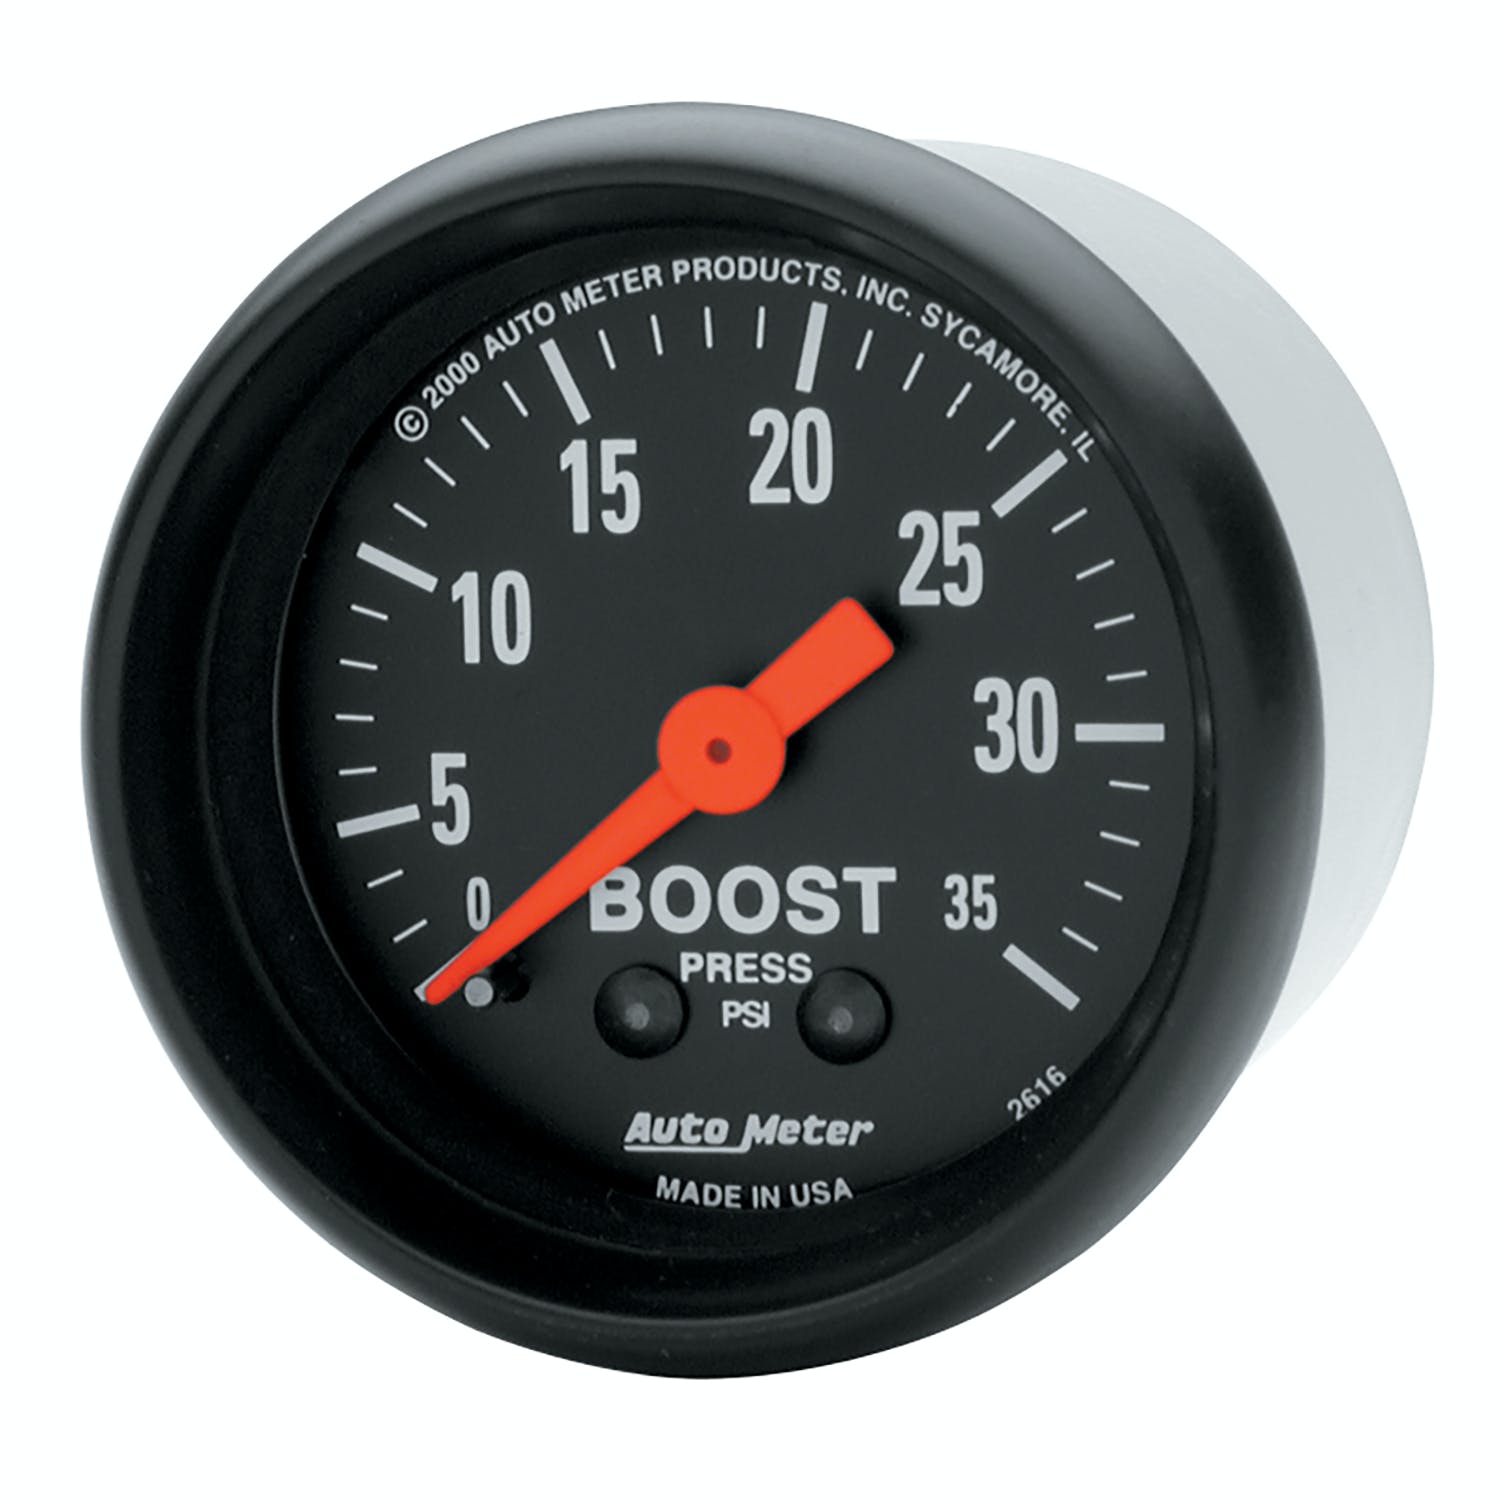 AutoMeter Products 2616 Boost 0-35 PSI